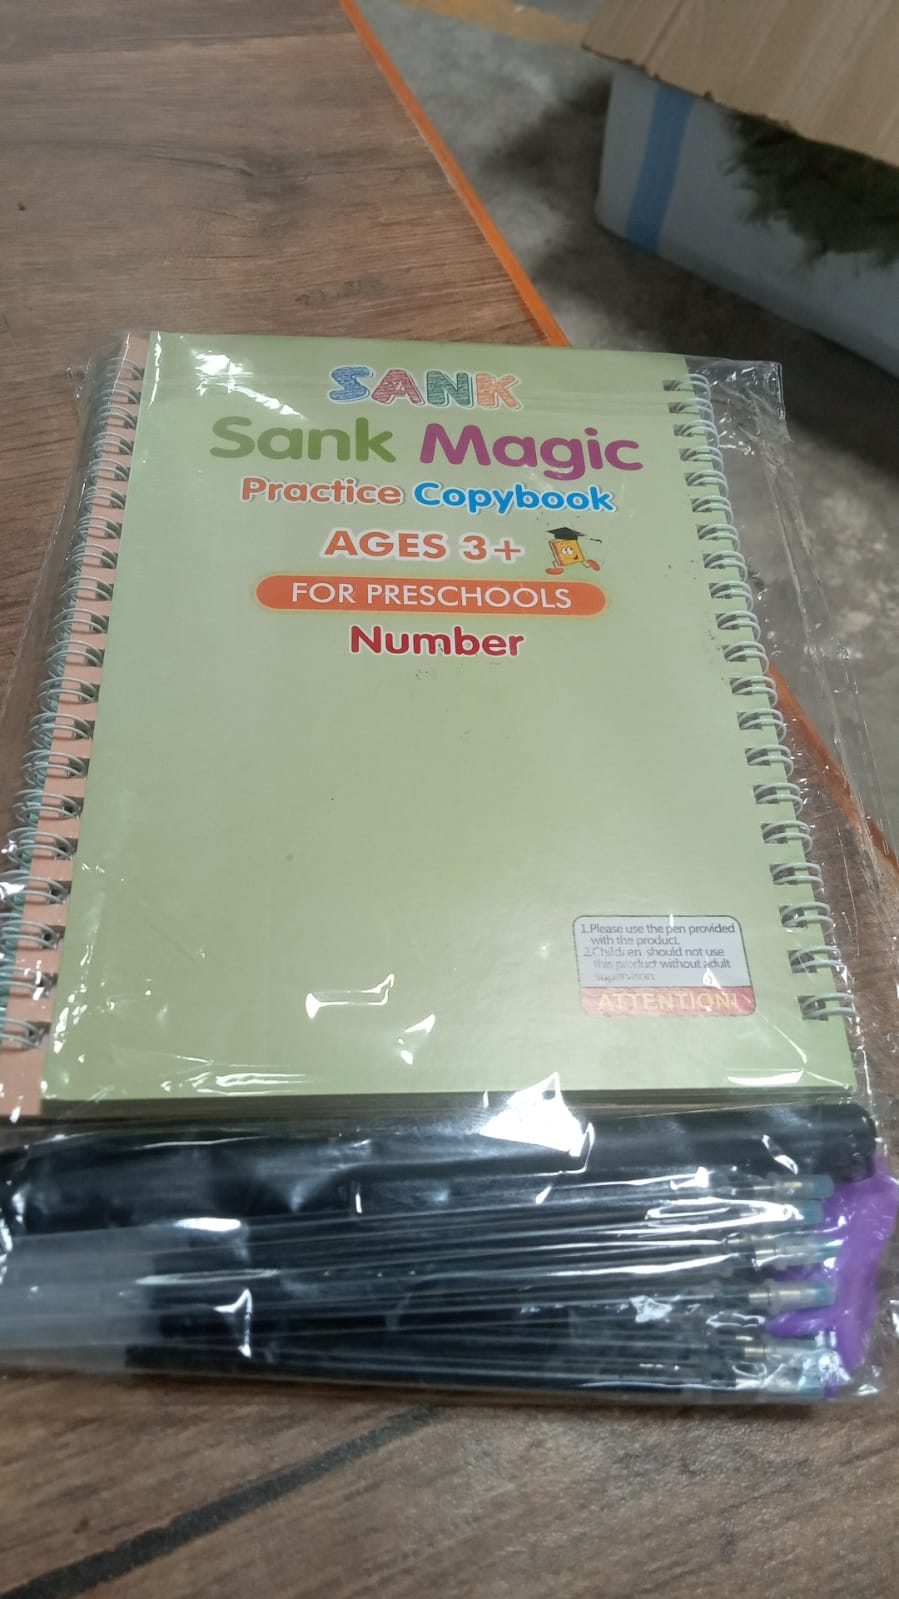 8075 4 Pc Magic Copybook widely used by kids, children’s and even adults also to write down important things over it while emergencies etc.